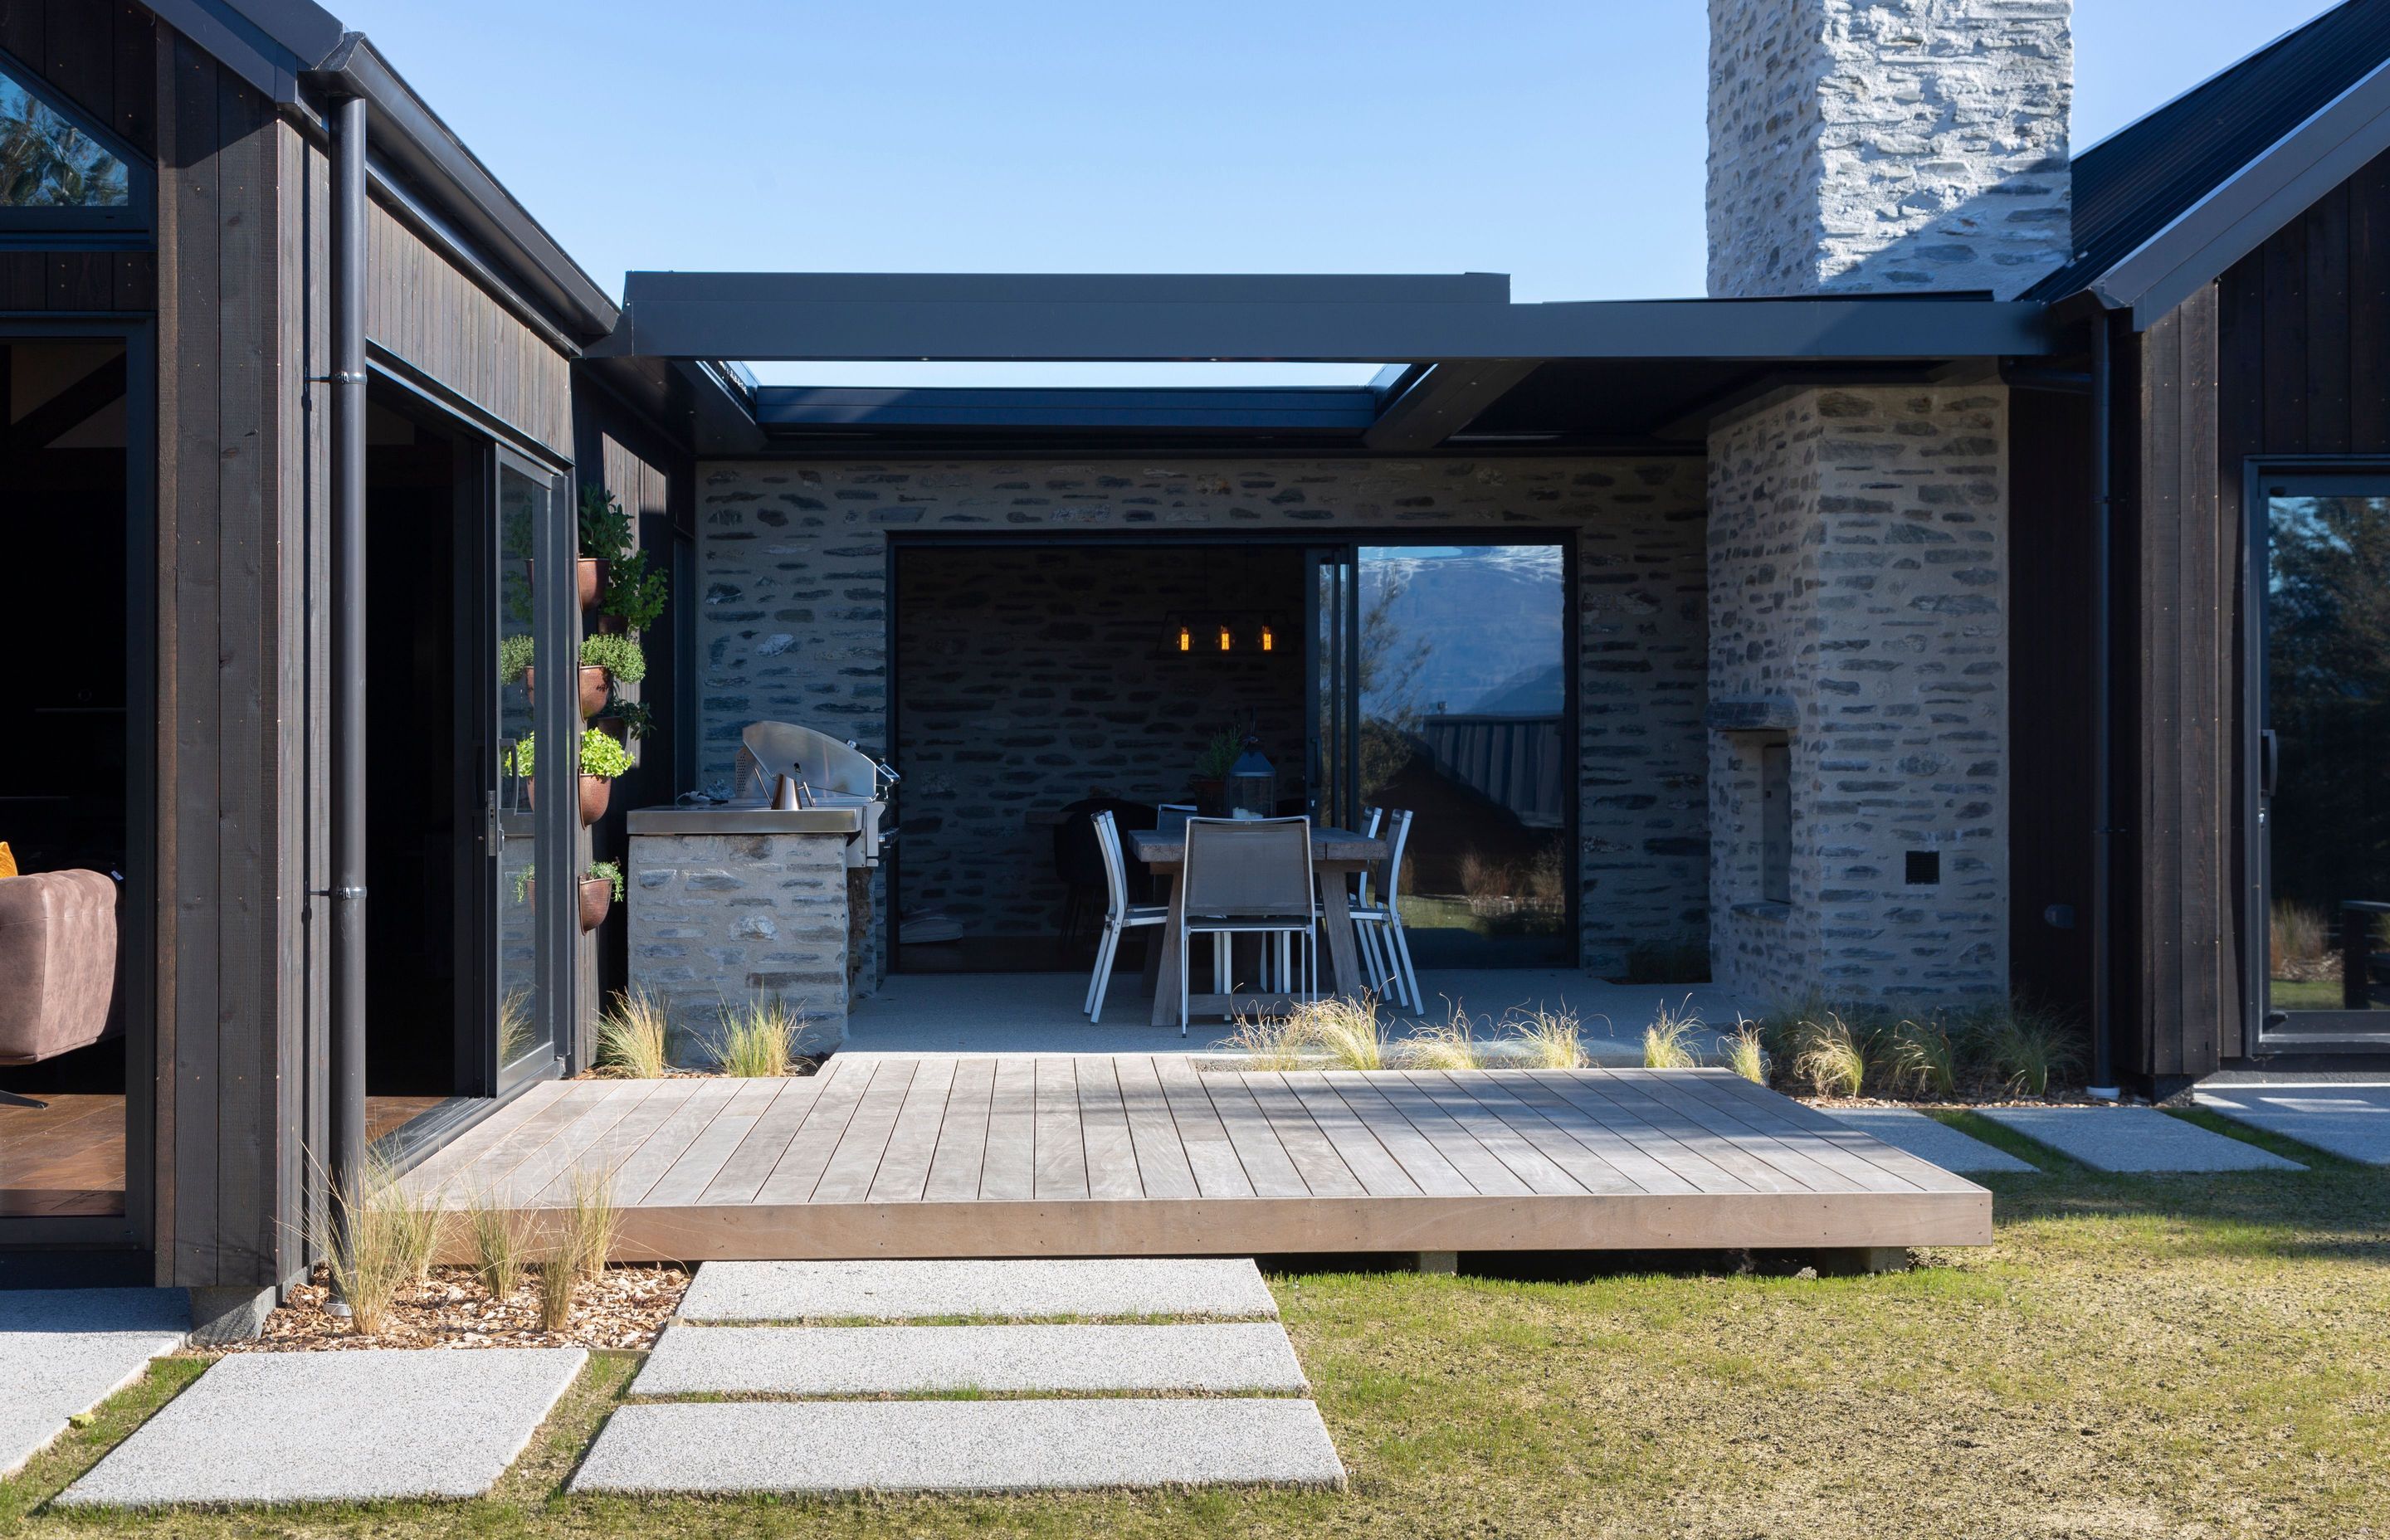 A courtyard can be accessed from the living area and dining room.